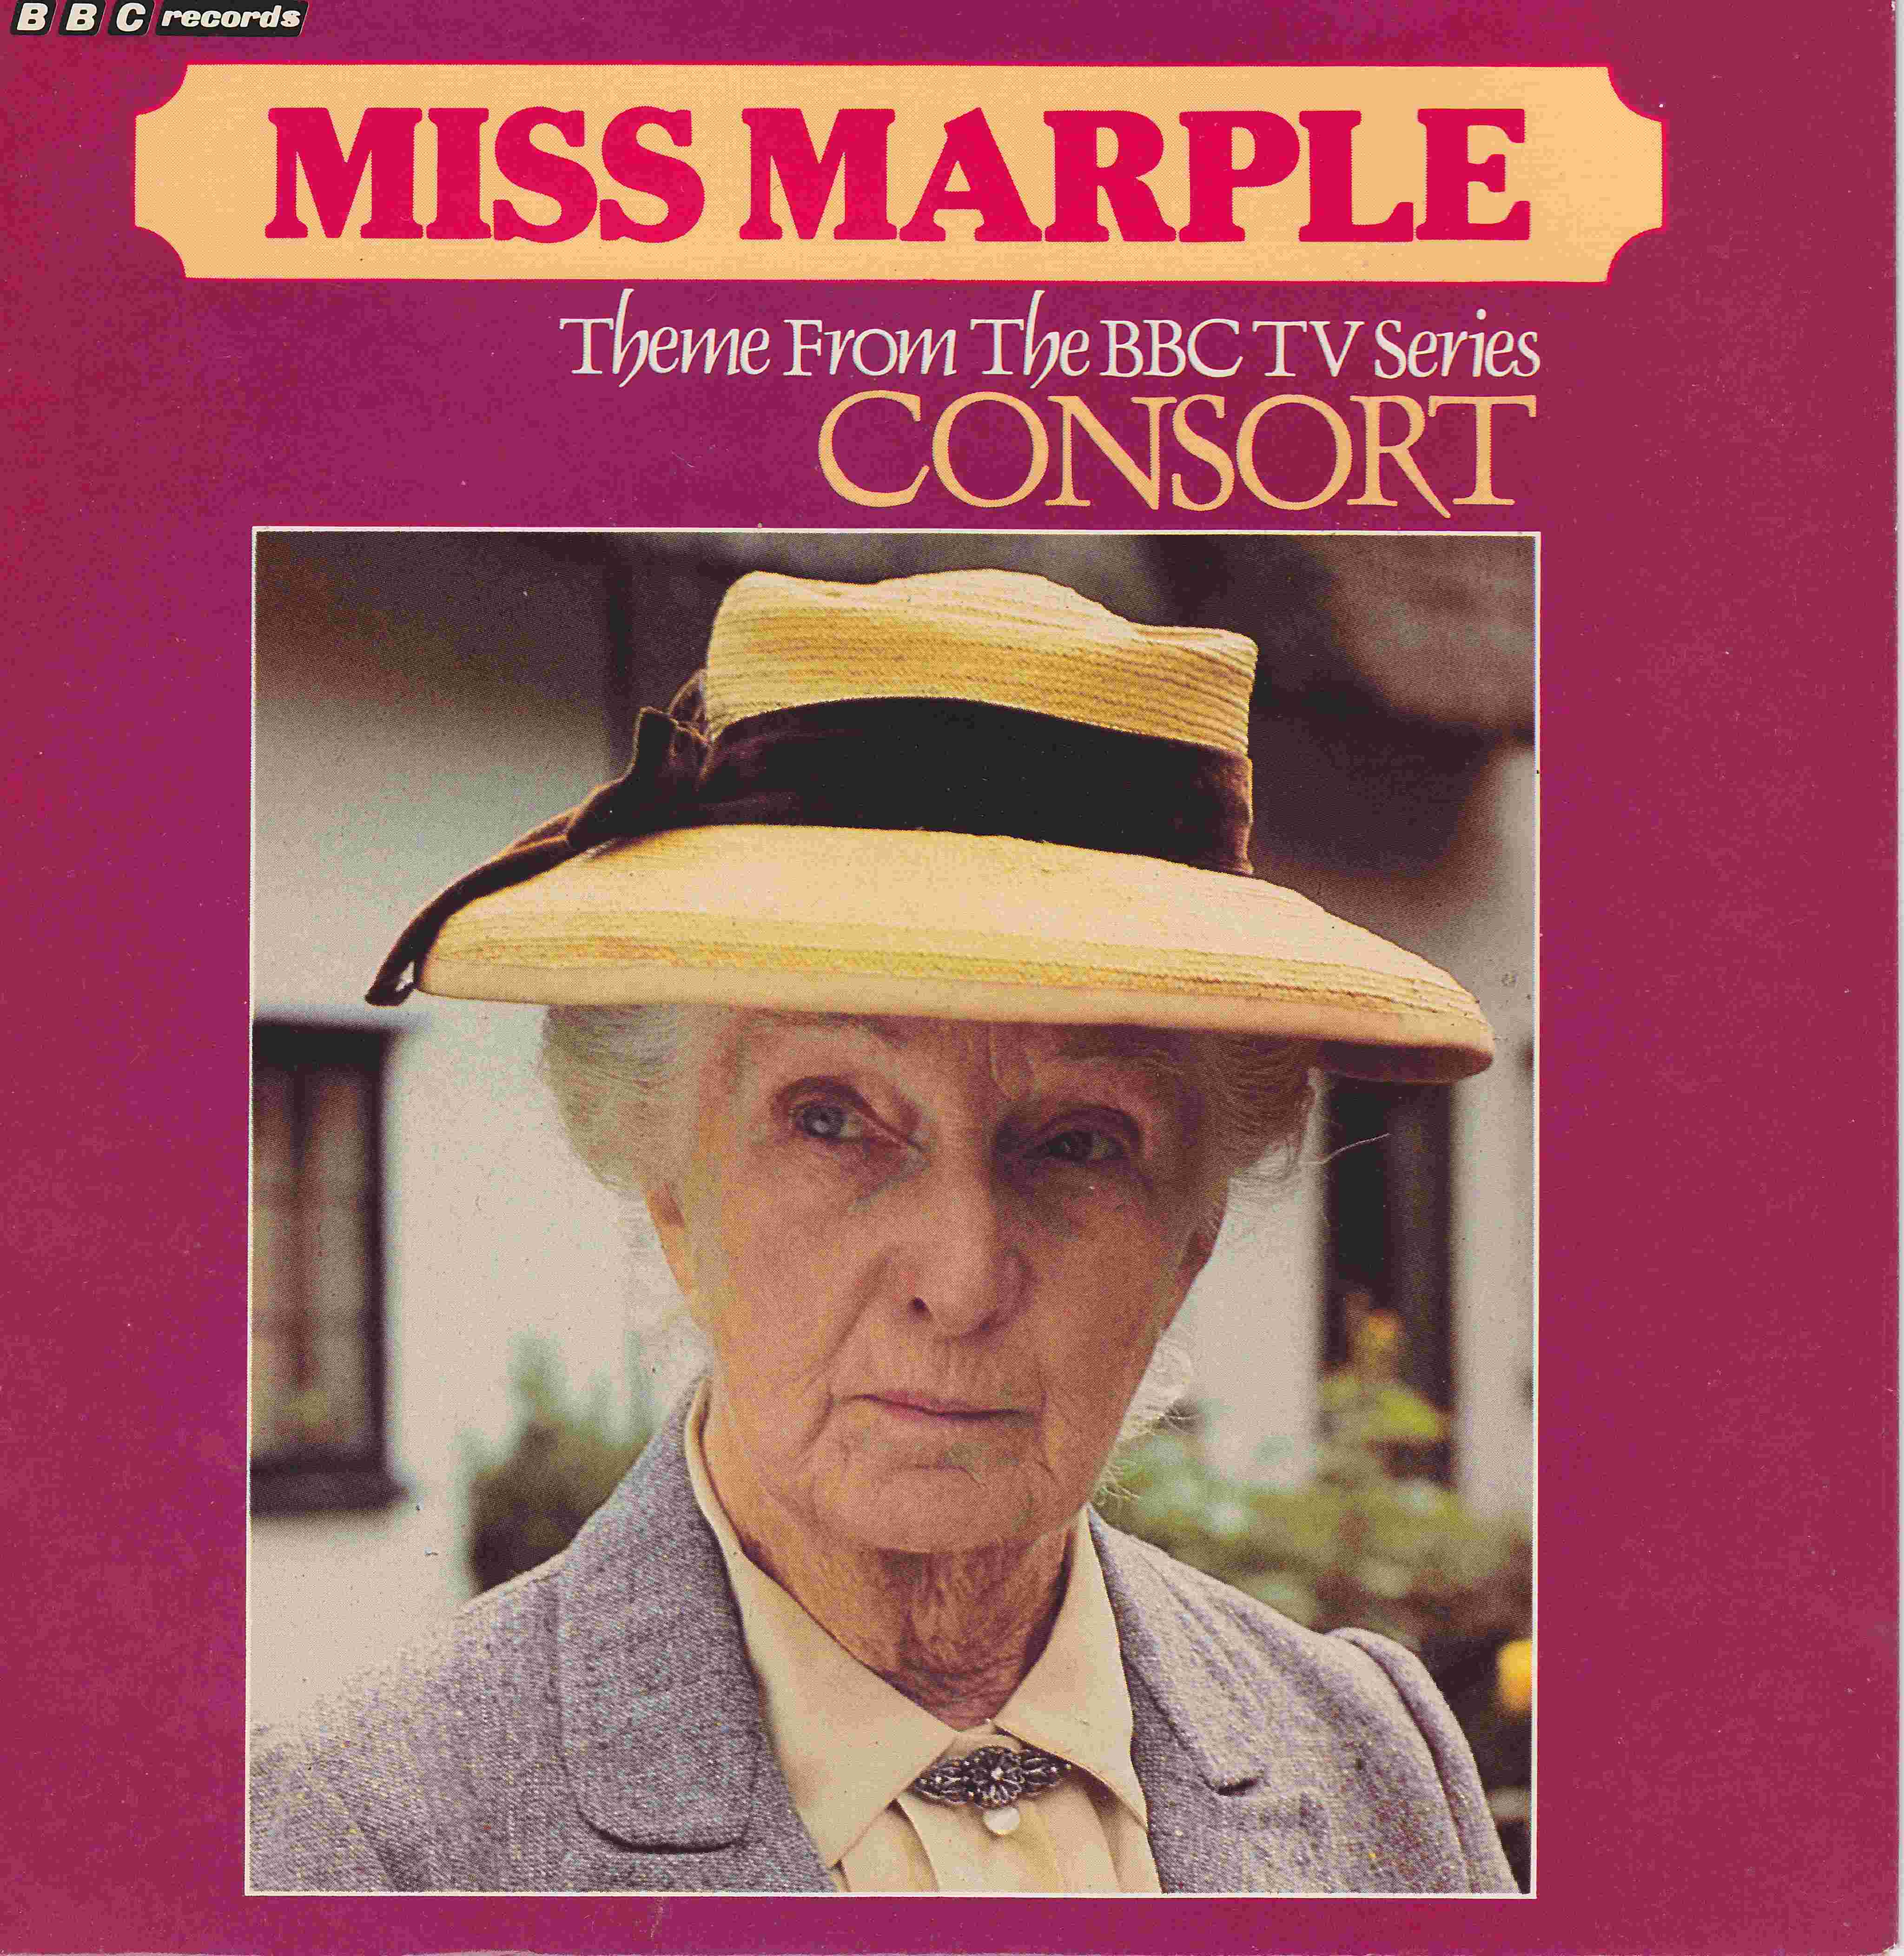 Picture of RESL 153 Miss Marple by artist Ken Howard / Alan Blaikley / John Altman / Consort from the BBC records and Tapes library